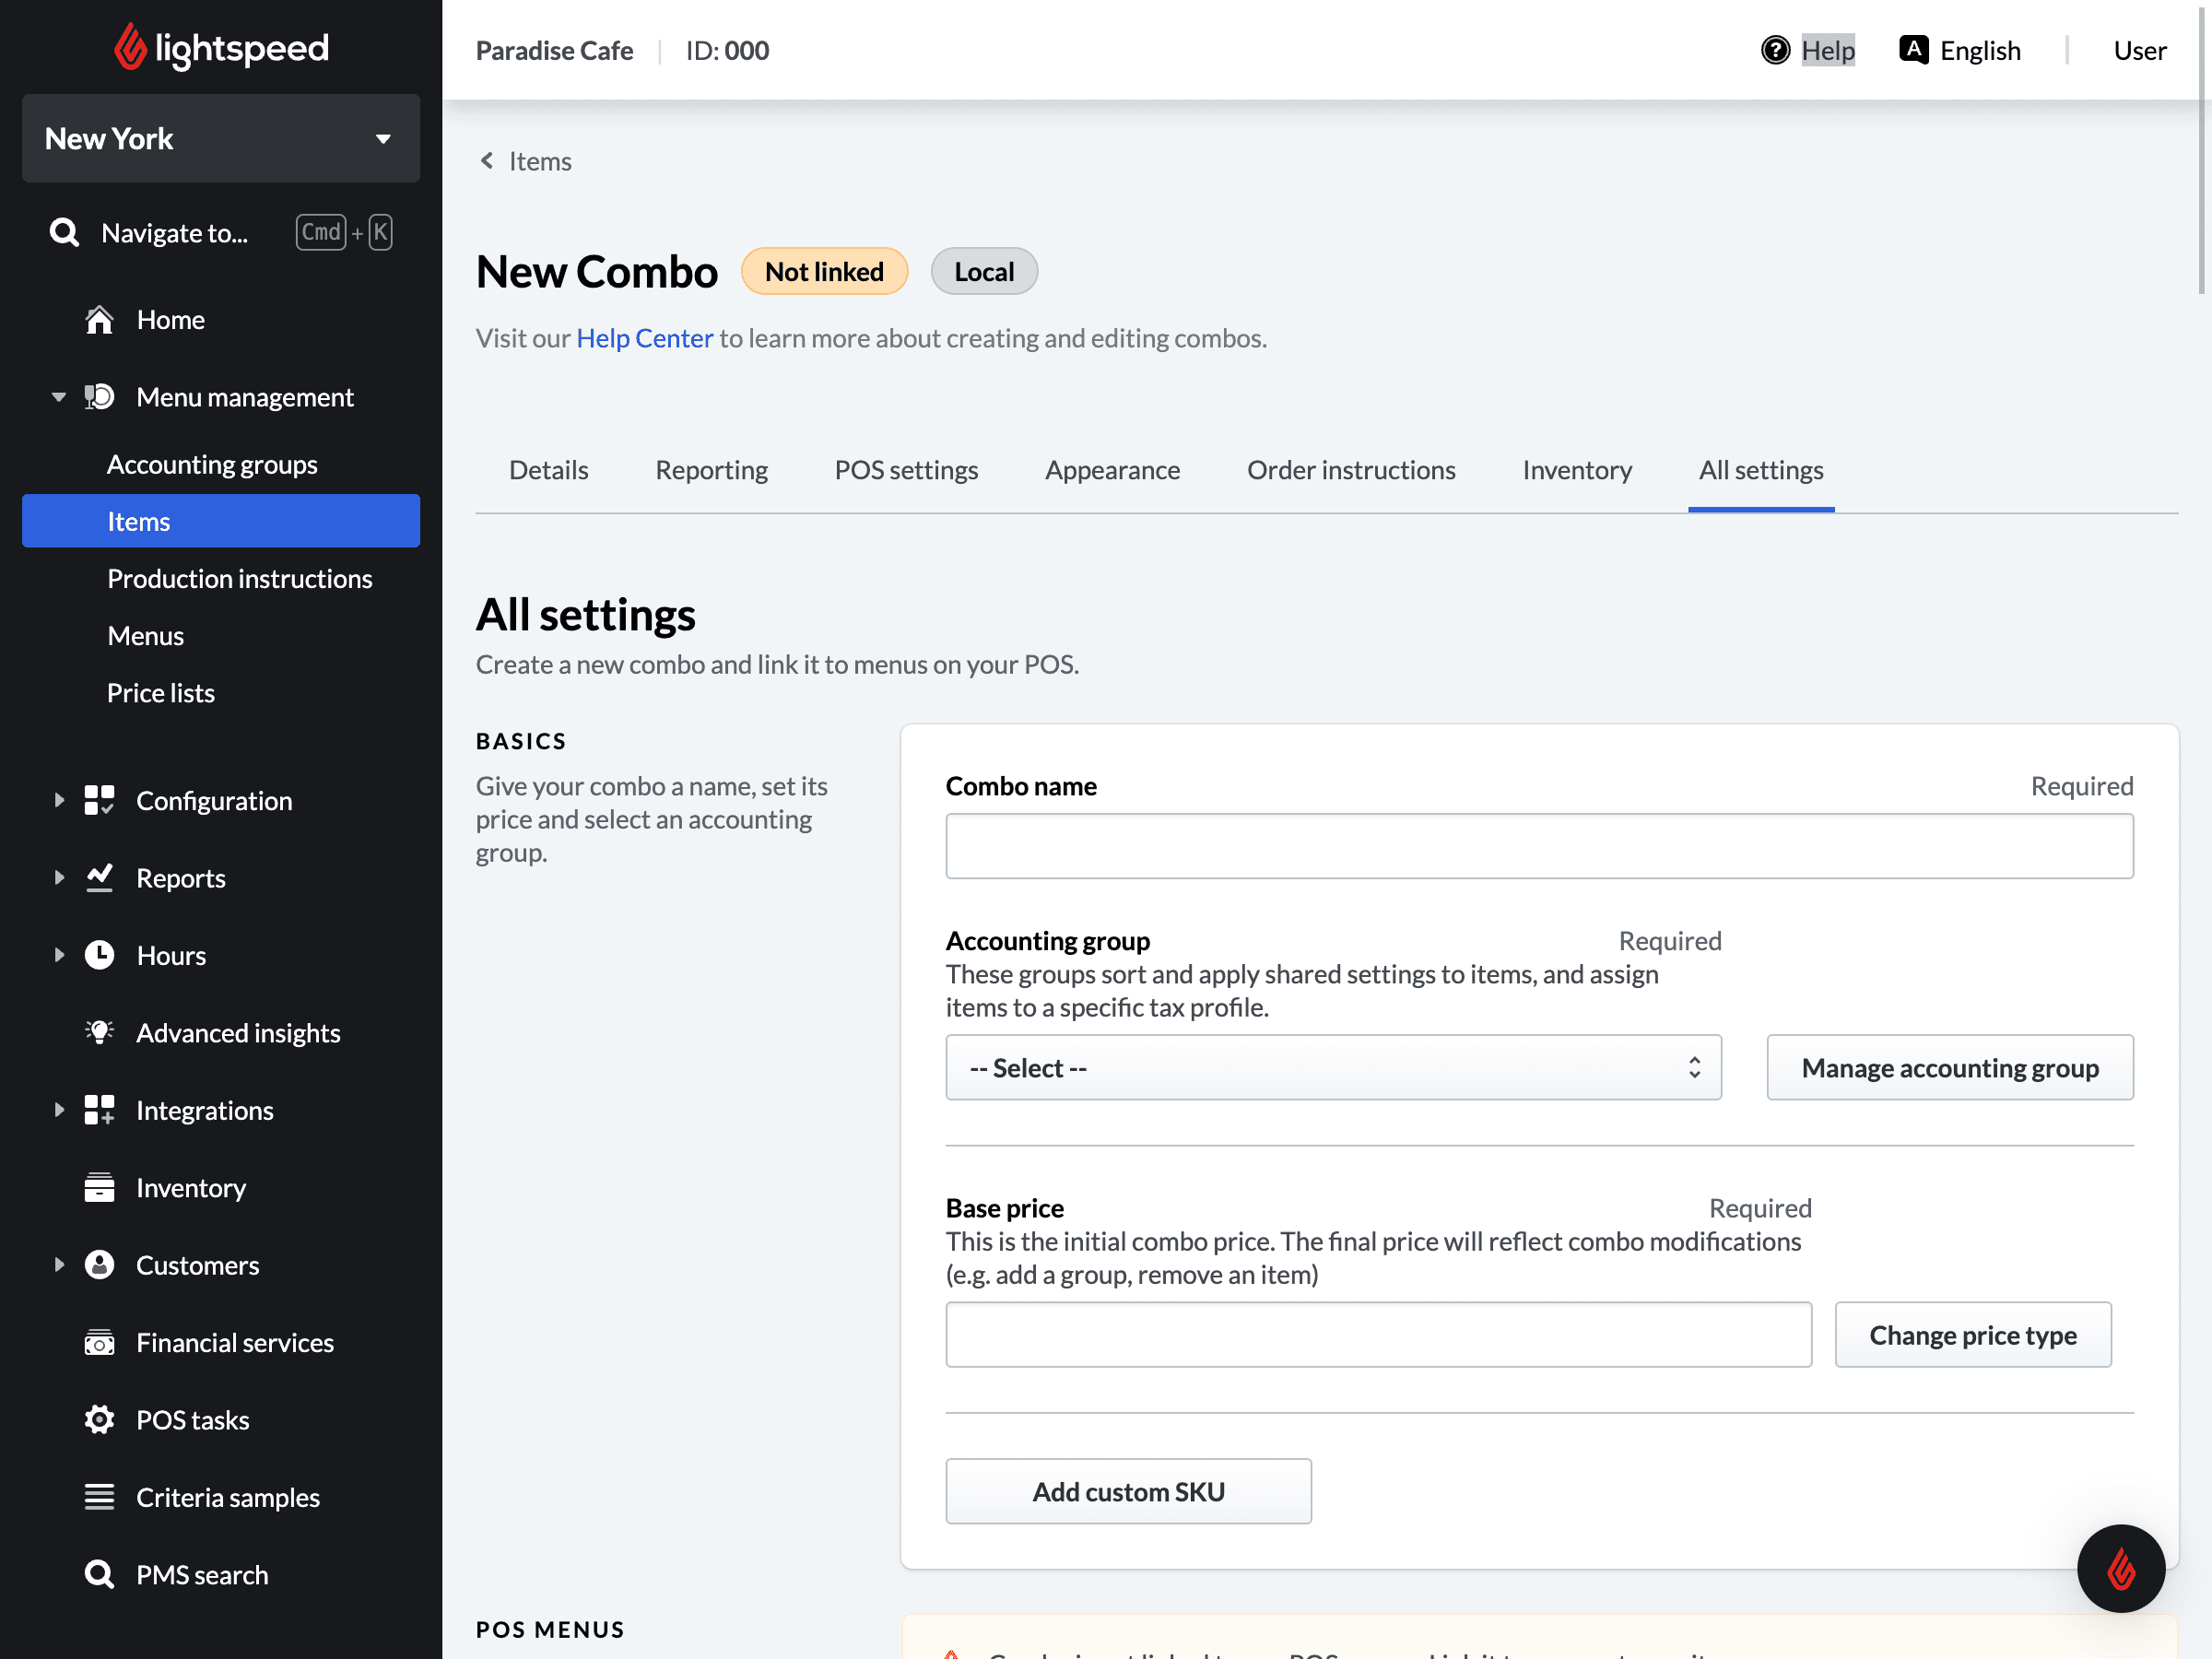 Page to view all combo settings at once